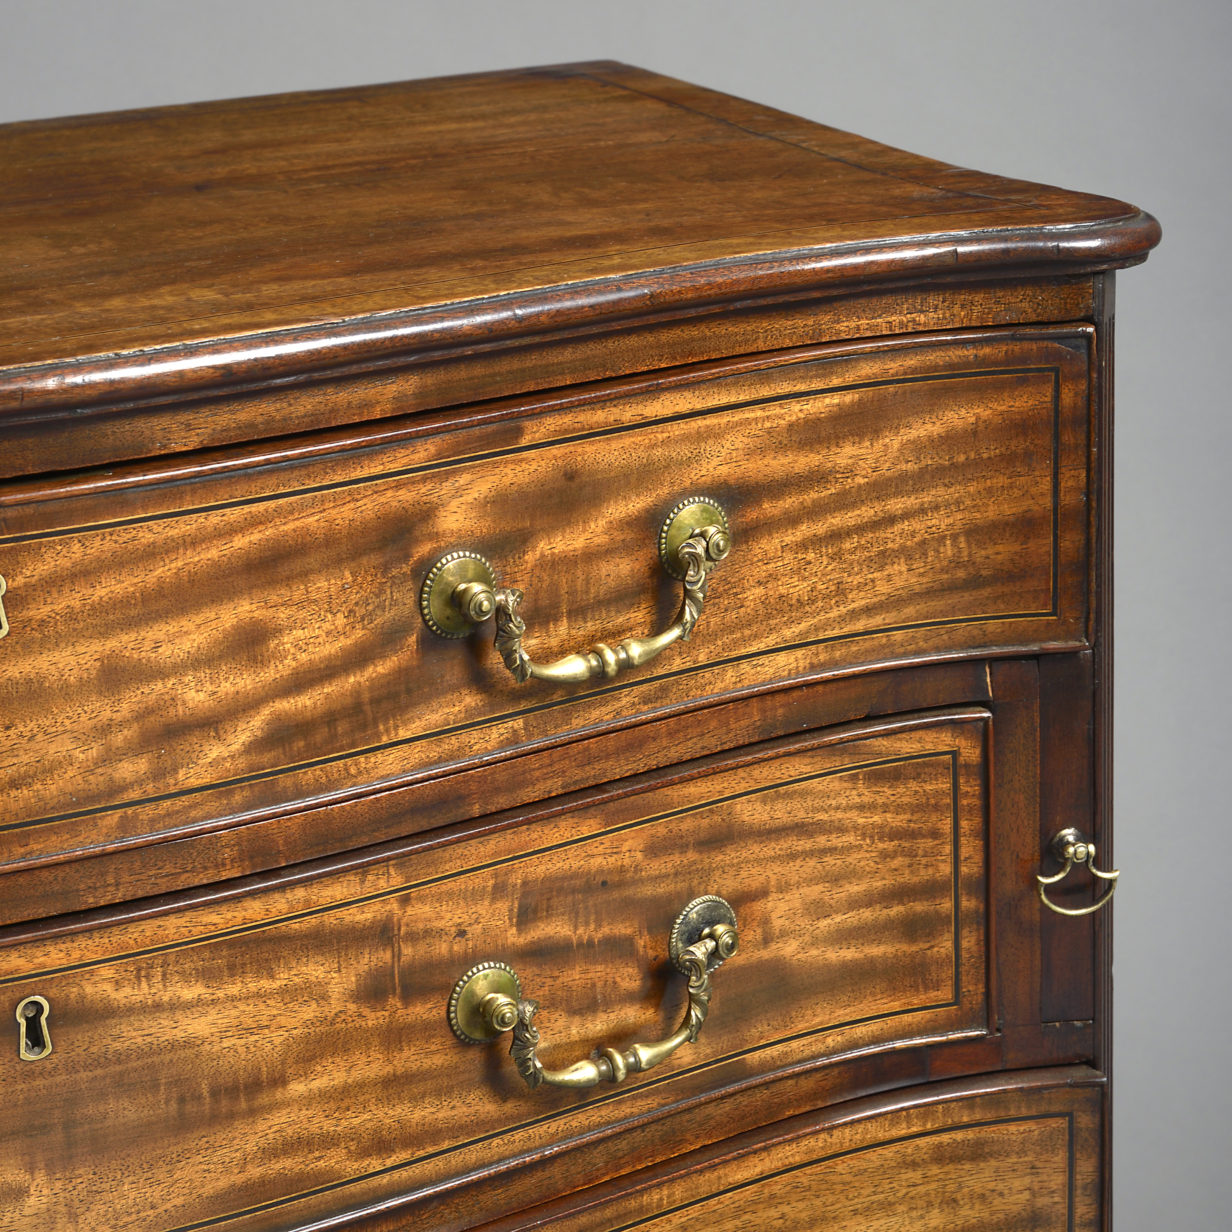 Serpentine chest of drawers